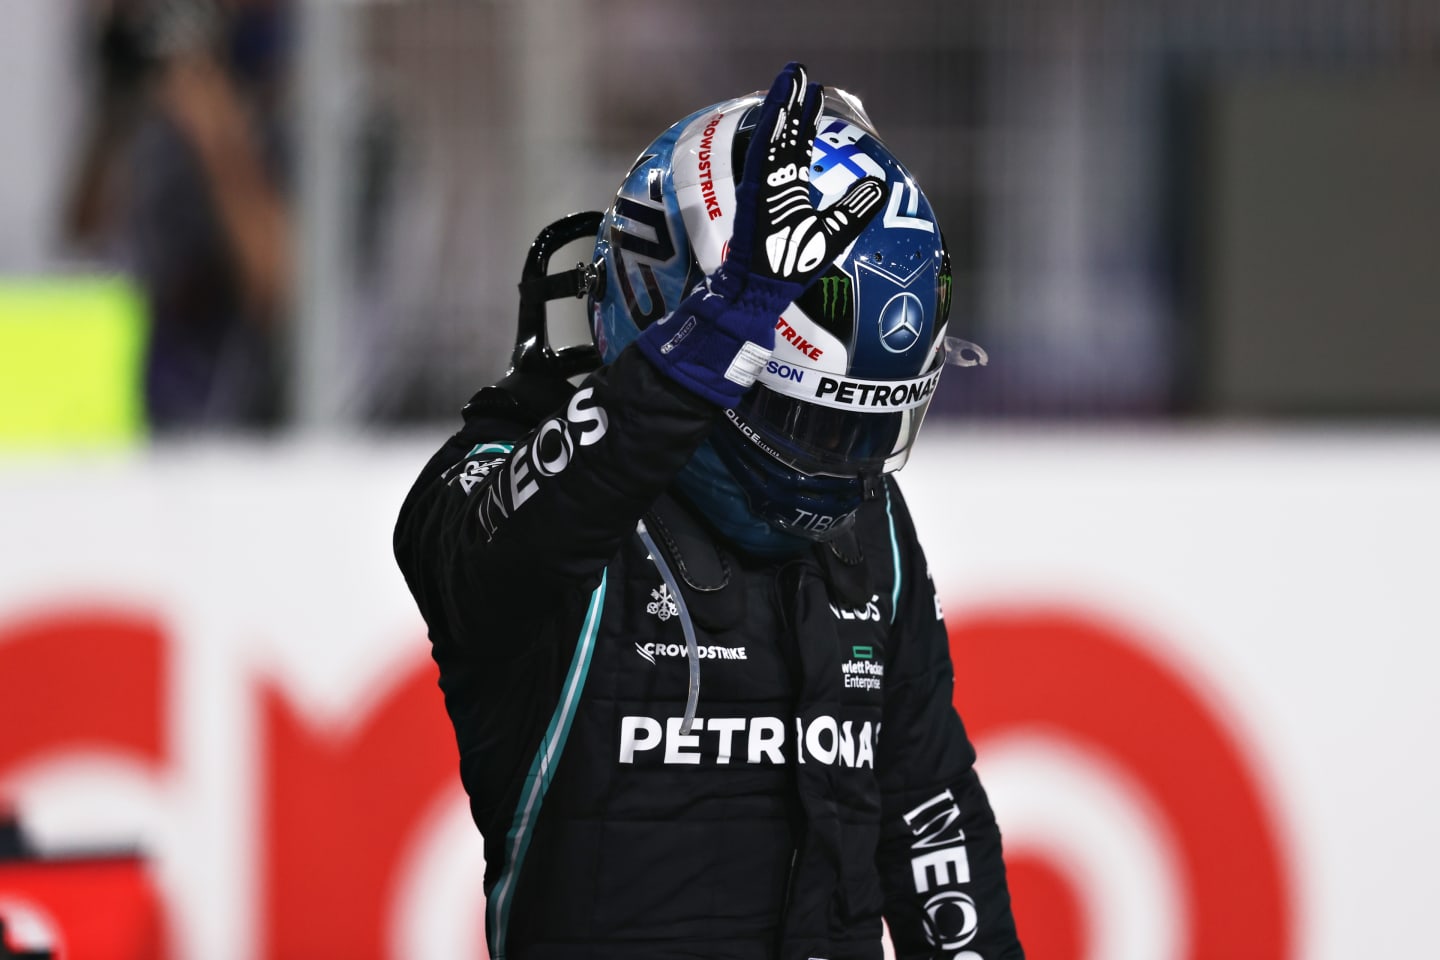 DOHA, QATAR - NOVEMBER 20: Third placed Valtteri Bottas of Finland and Mercedes GP celebrates in parc ferme during qualifying ahead of the F1 Grand Prix of Qatar at Losail International Circuit on November 20, 2021 in Doha, Qatar. (Photo by Lars Baron/Getty Images)